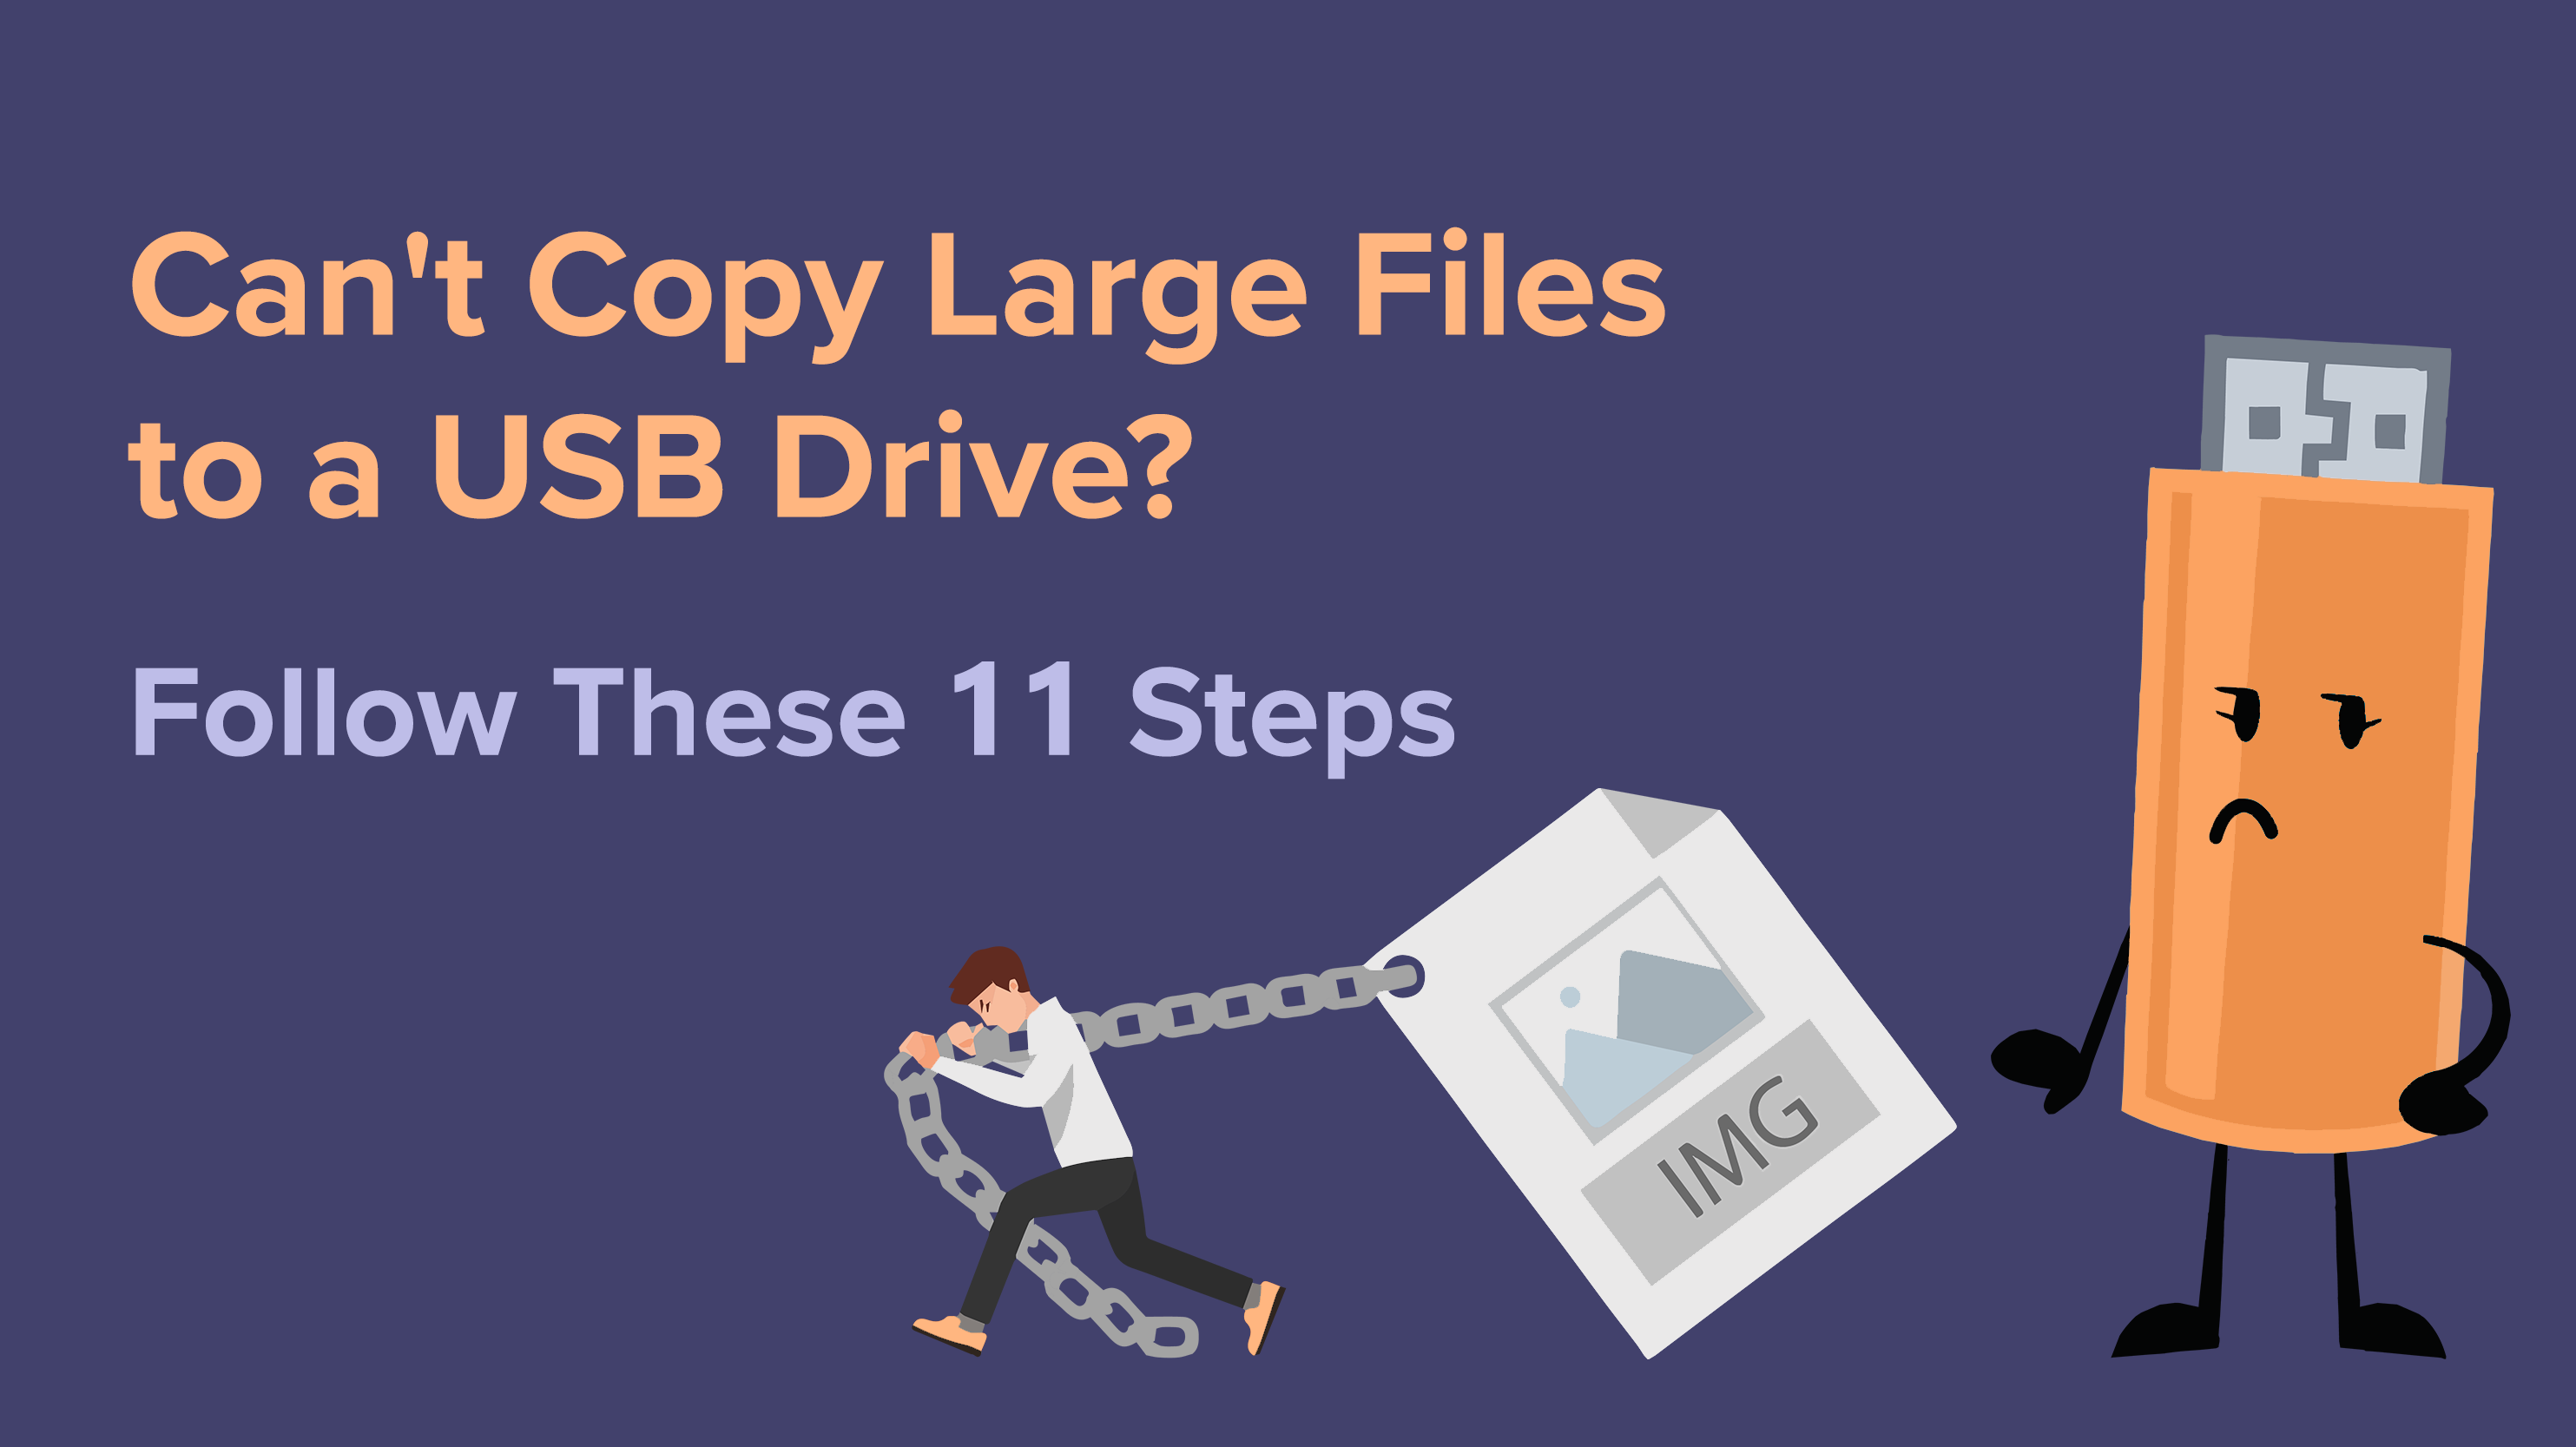 Can't Copy Large Files to a USB Drive? Follow These 11 Steps